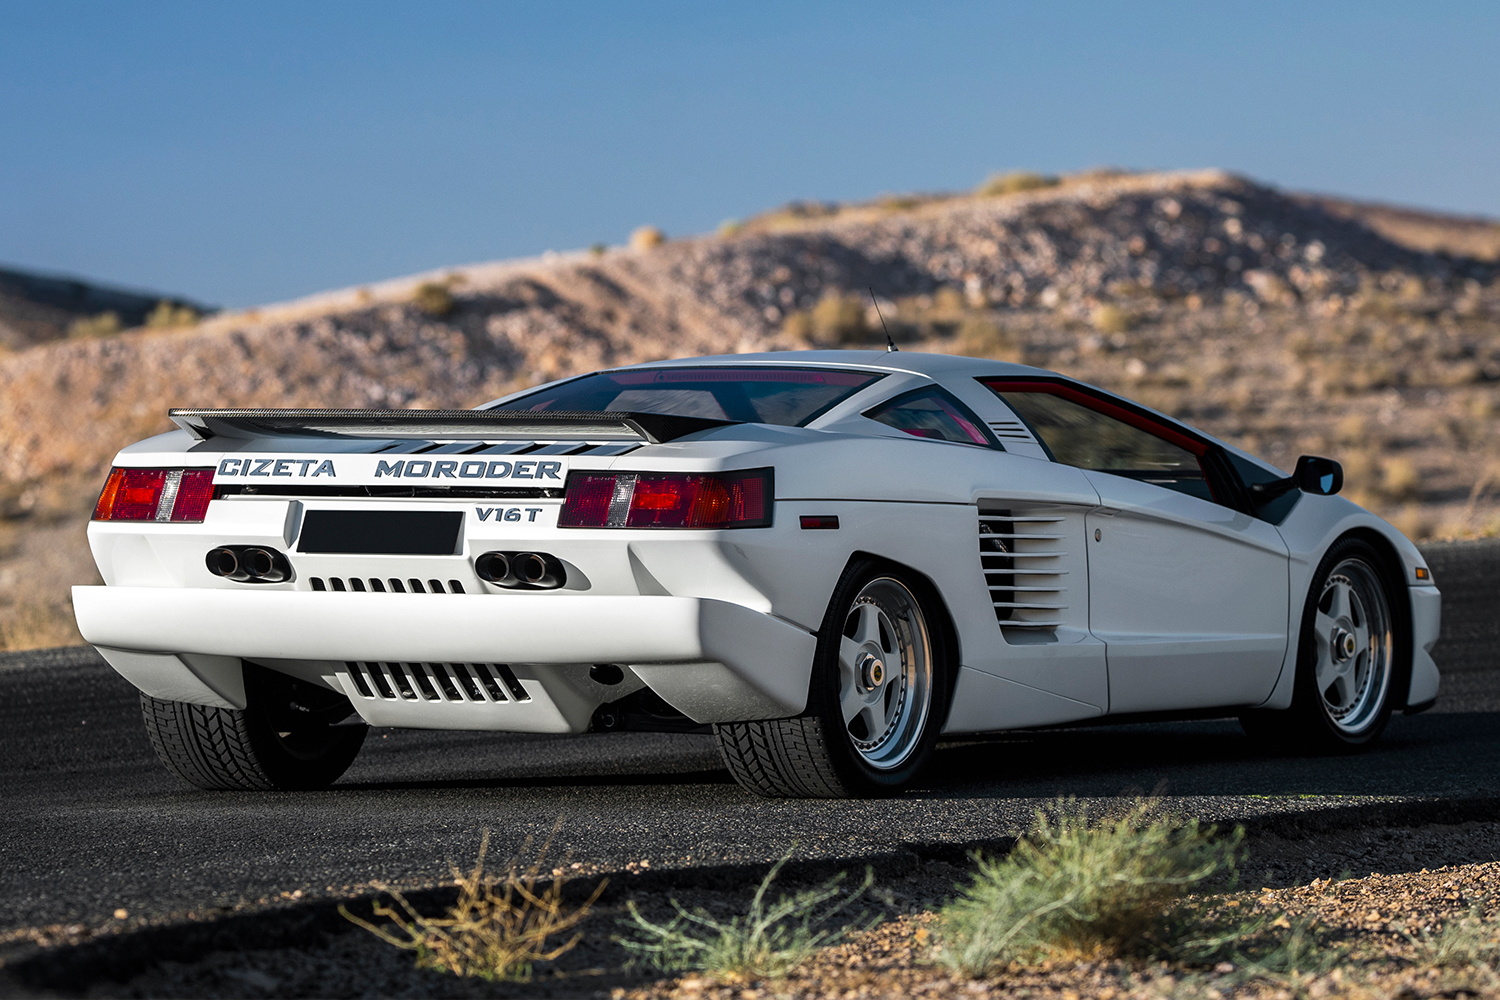 The rear end of the 1988 Cizeta-Moroder V16T supercar, which was built by Claudio Zampolli and owned Giorgio Moroder. It's headed to auction at RM Sotheby's Arizona sale in 2022.